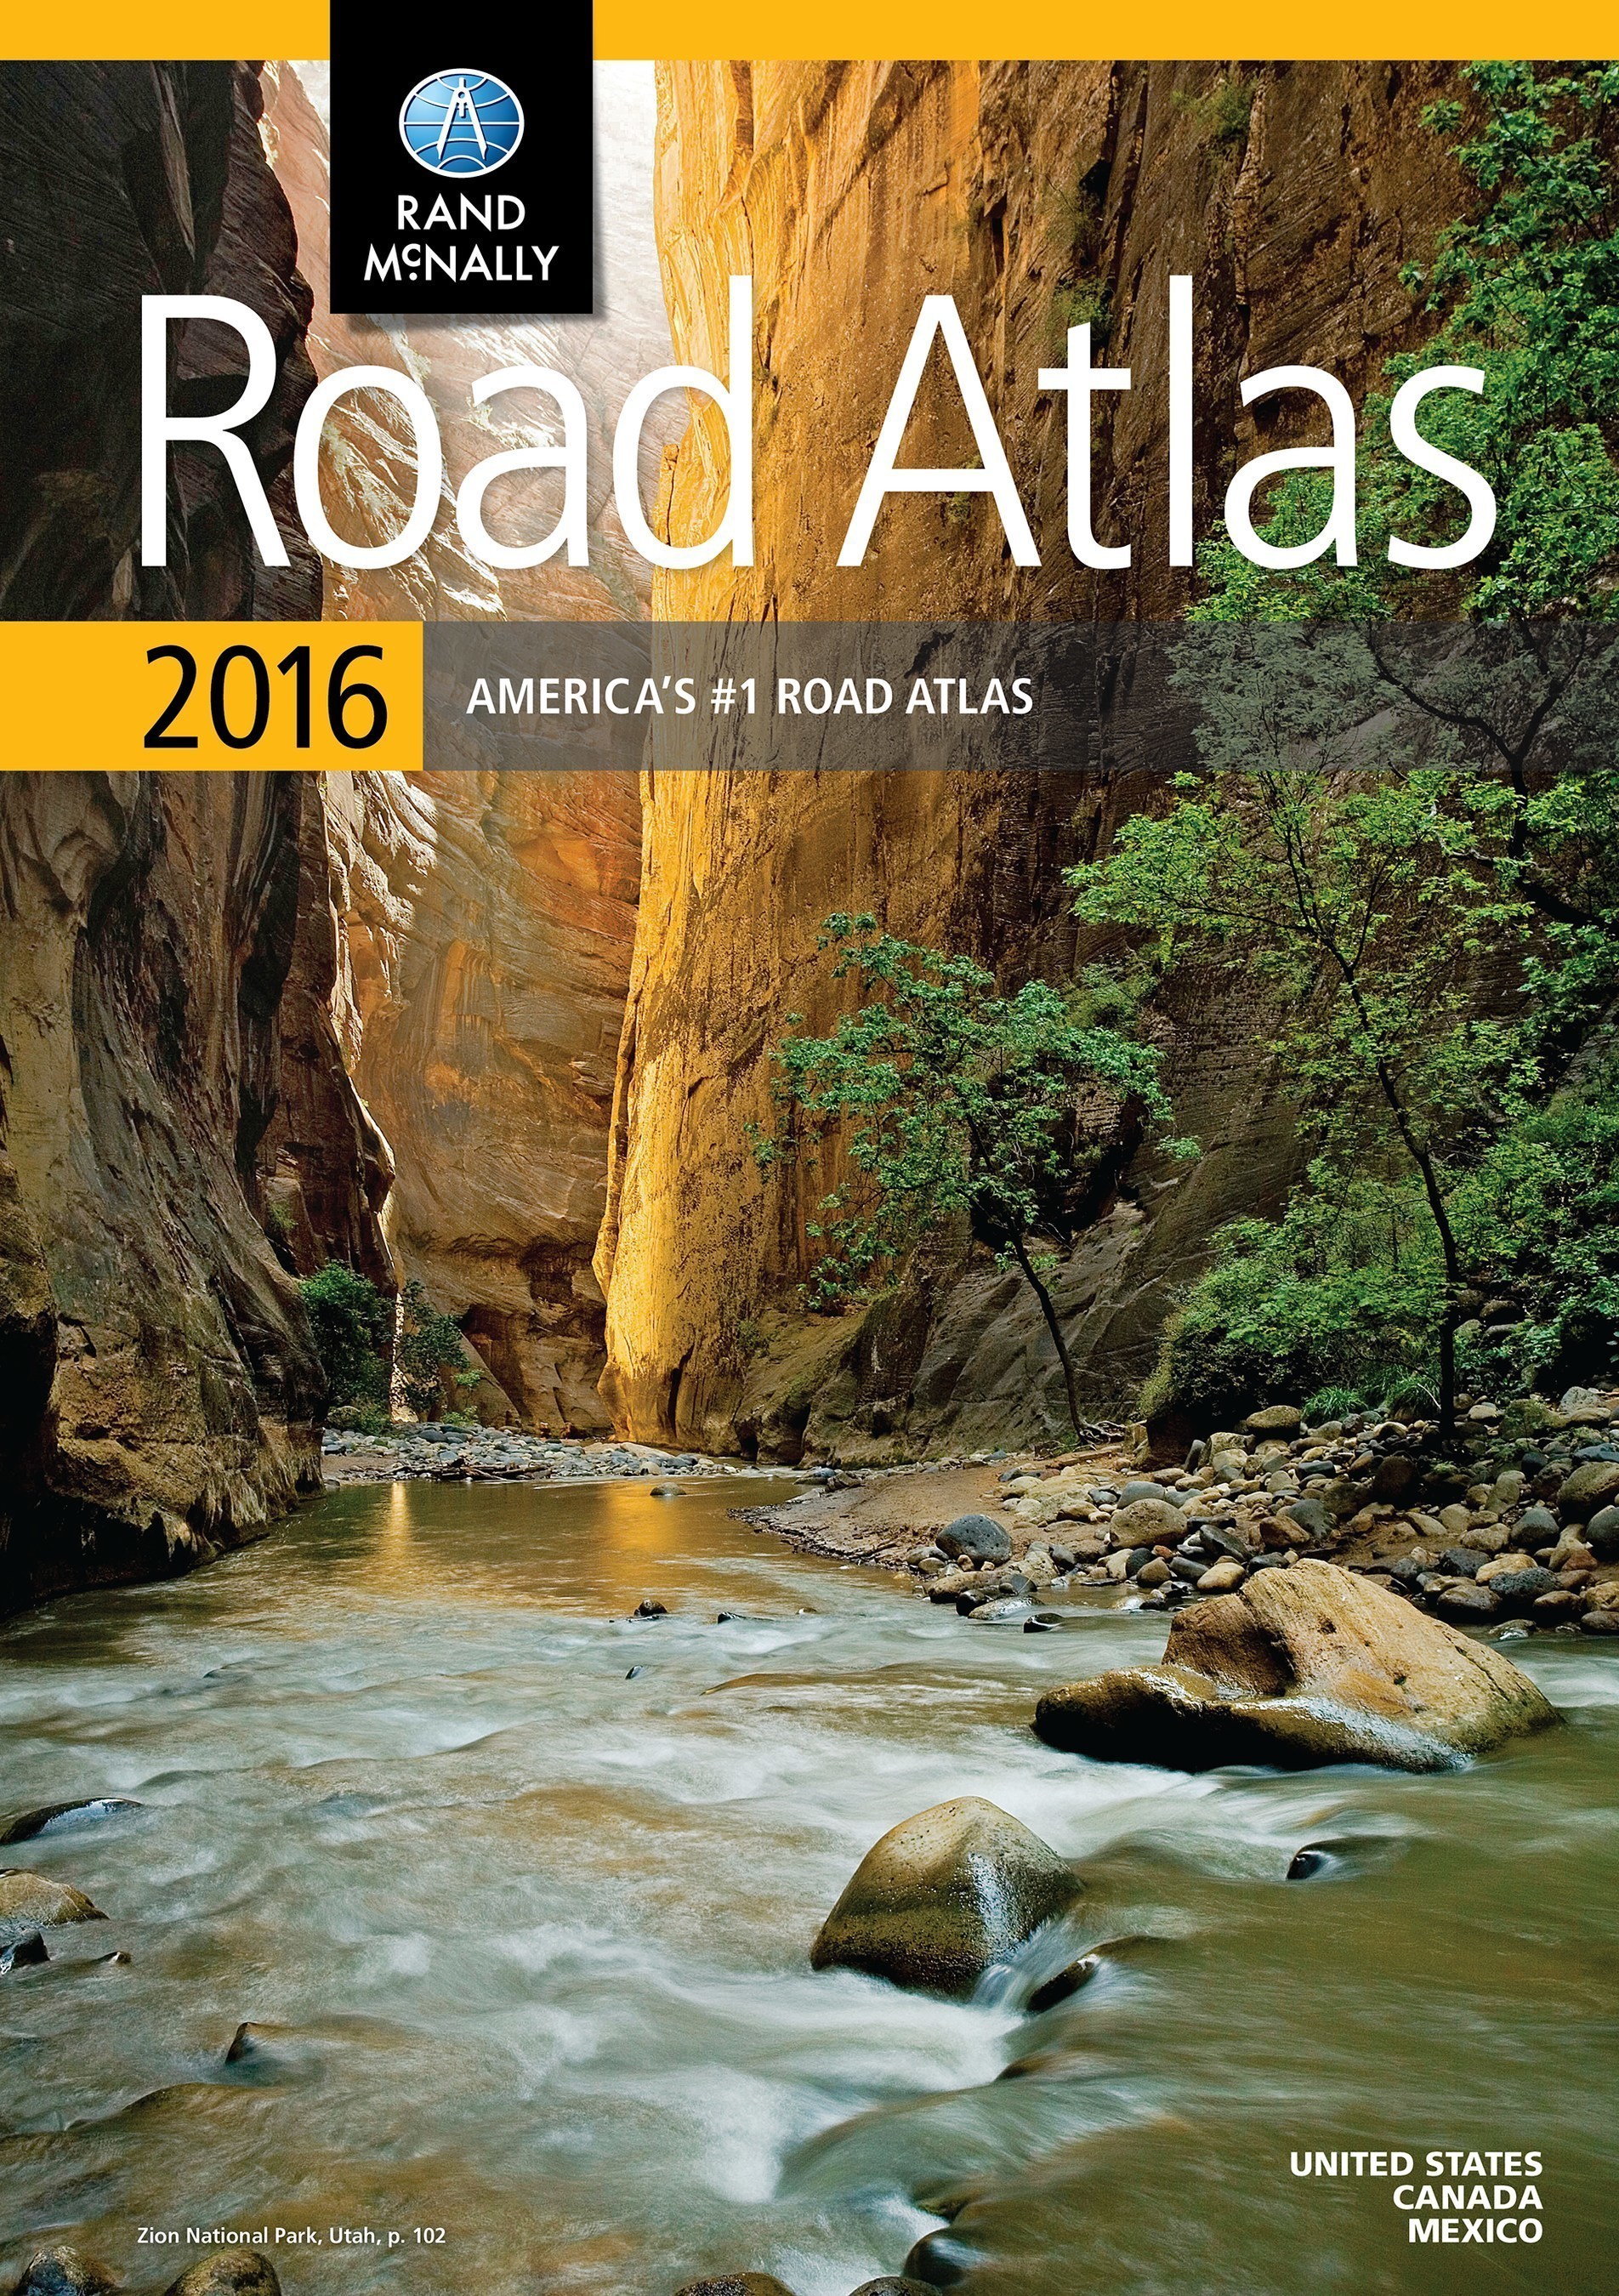 The 2016 edition of the Rand McNally Road Atlas is now available, just in time for travel season. America's #1 Road Atlas is packed with upgrades, trip suggestions, and updated maps to help planners and travelers see "the big picture."